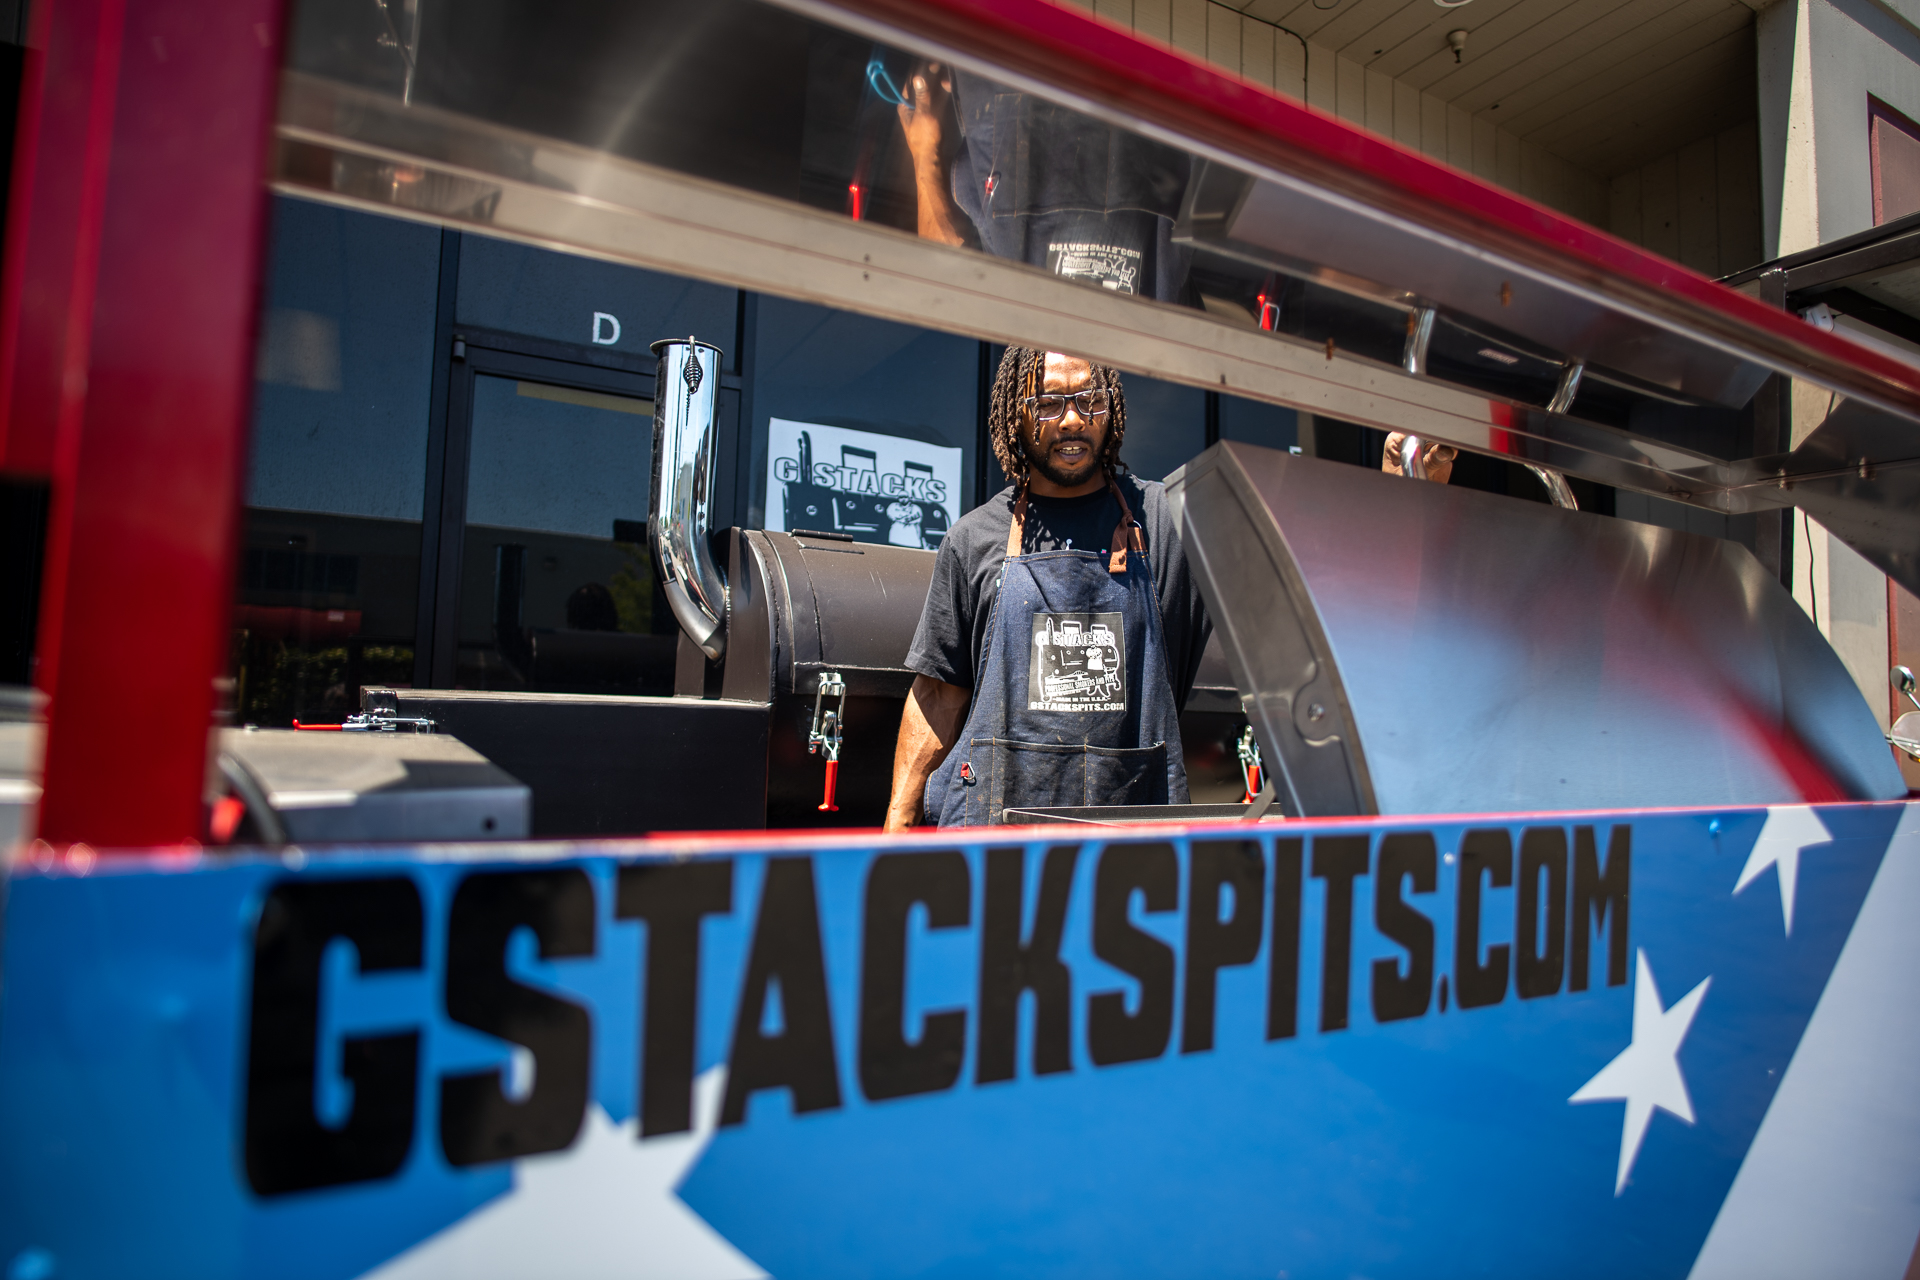 A man seen through an opening in a a barbecue smoker emblazoned with the website "GStackspits.com"